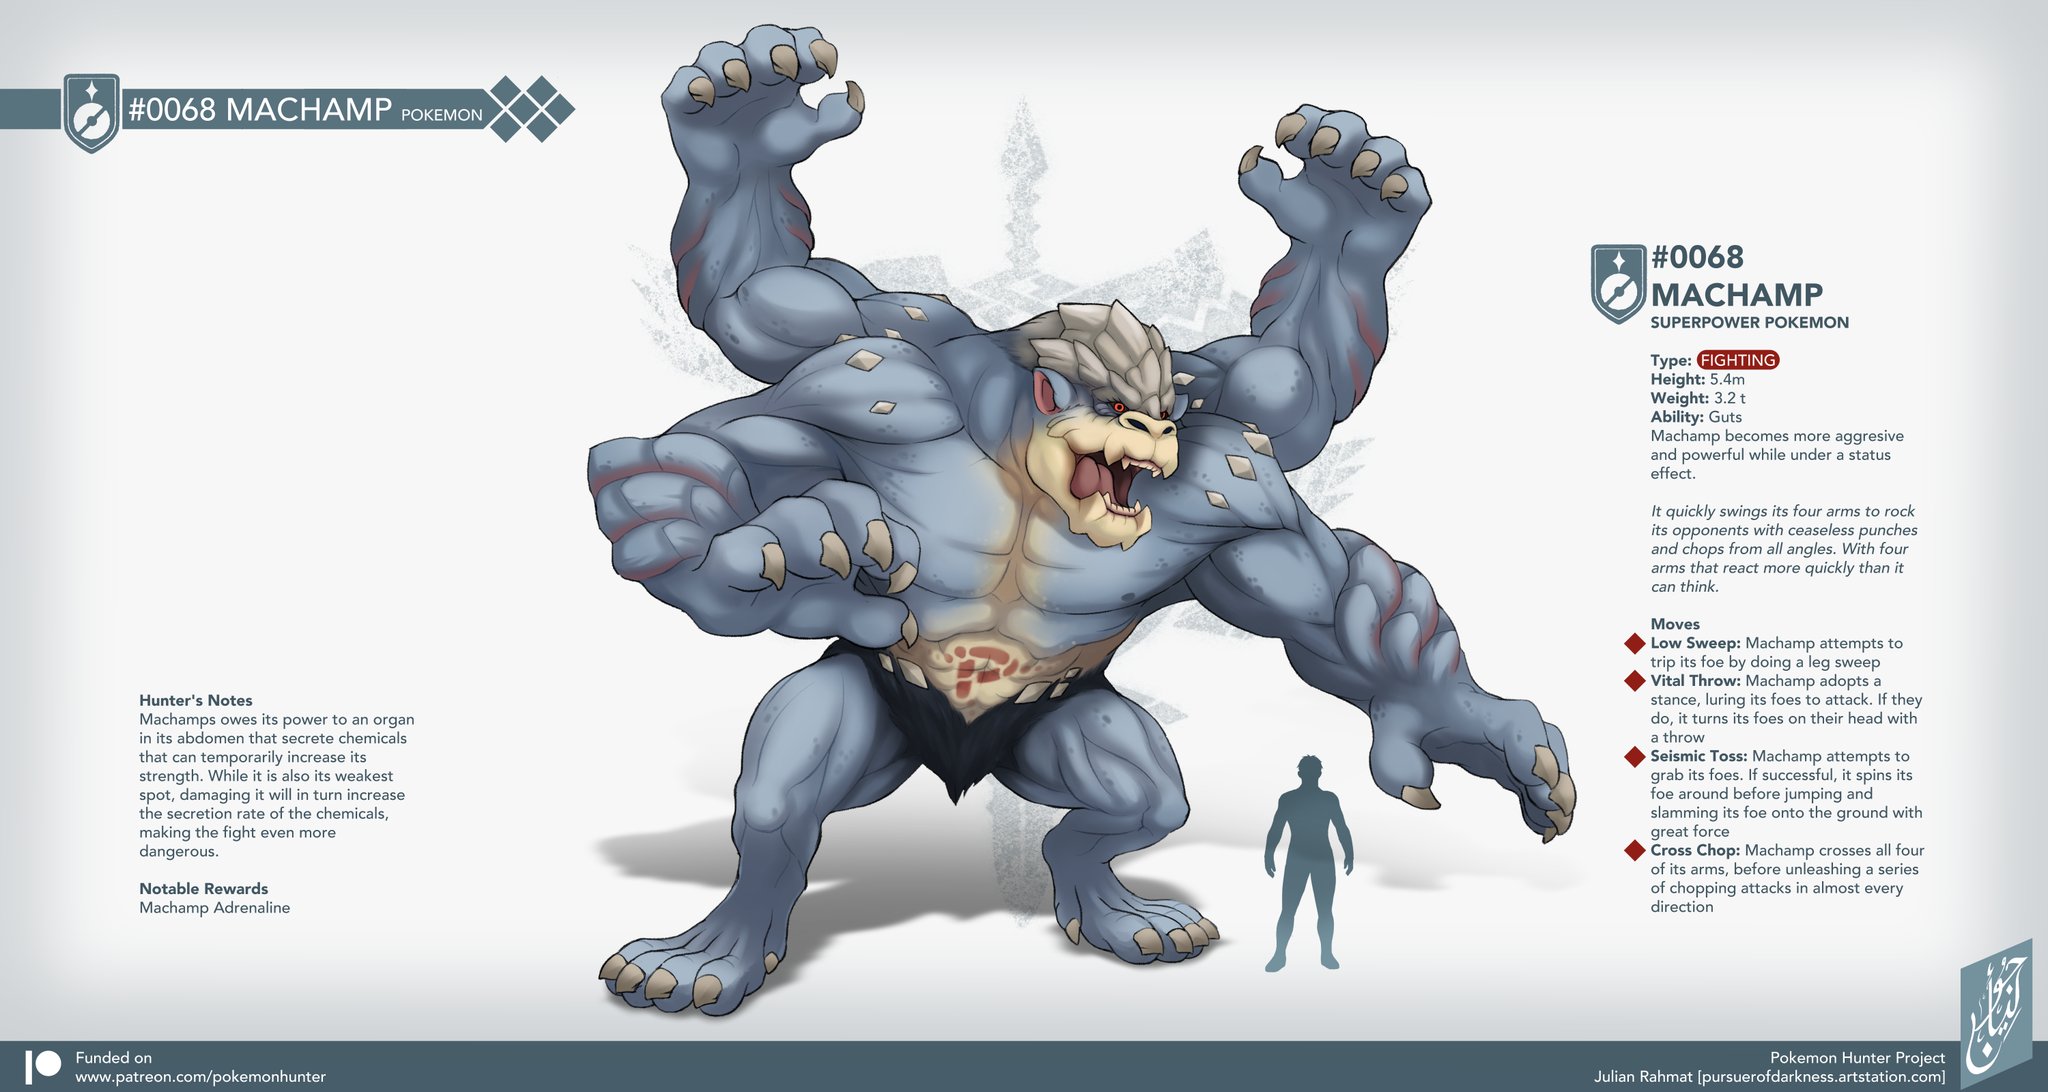 Julian R - Pokemon X Monster Hunter Project on X: Regigigas, the Colossal  Pokemon is the final in a series commissioned by Patreon supporter  Cholulorax. It is the leader of the legendary